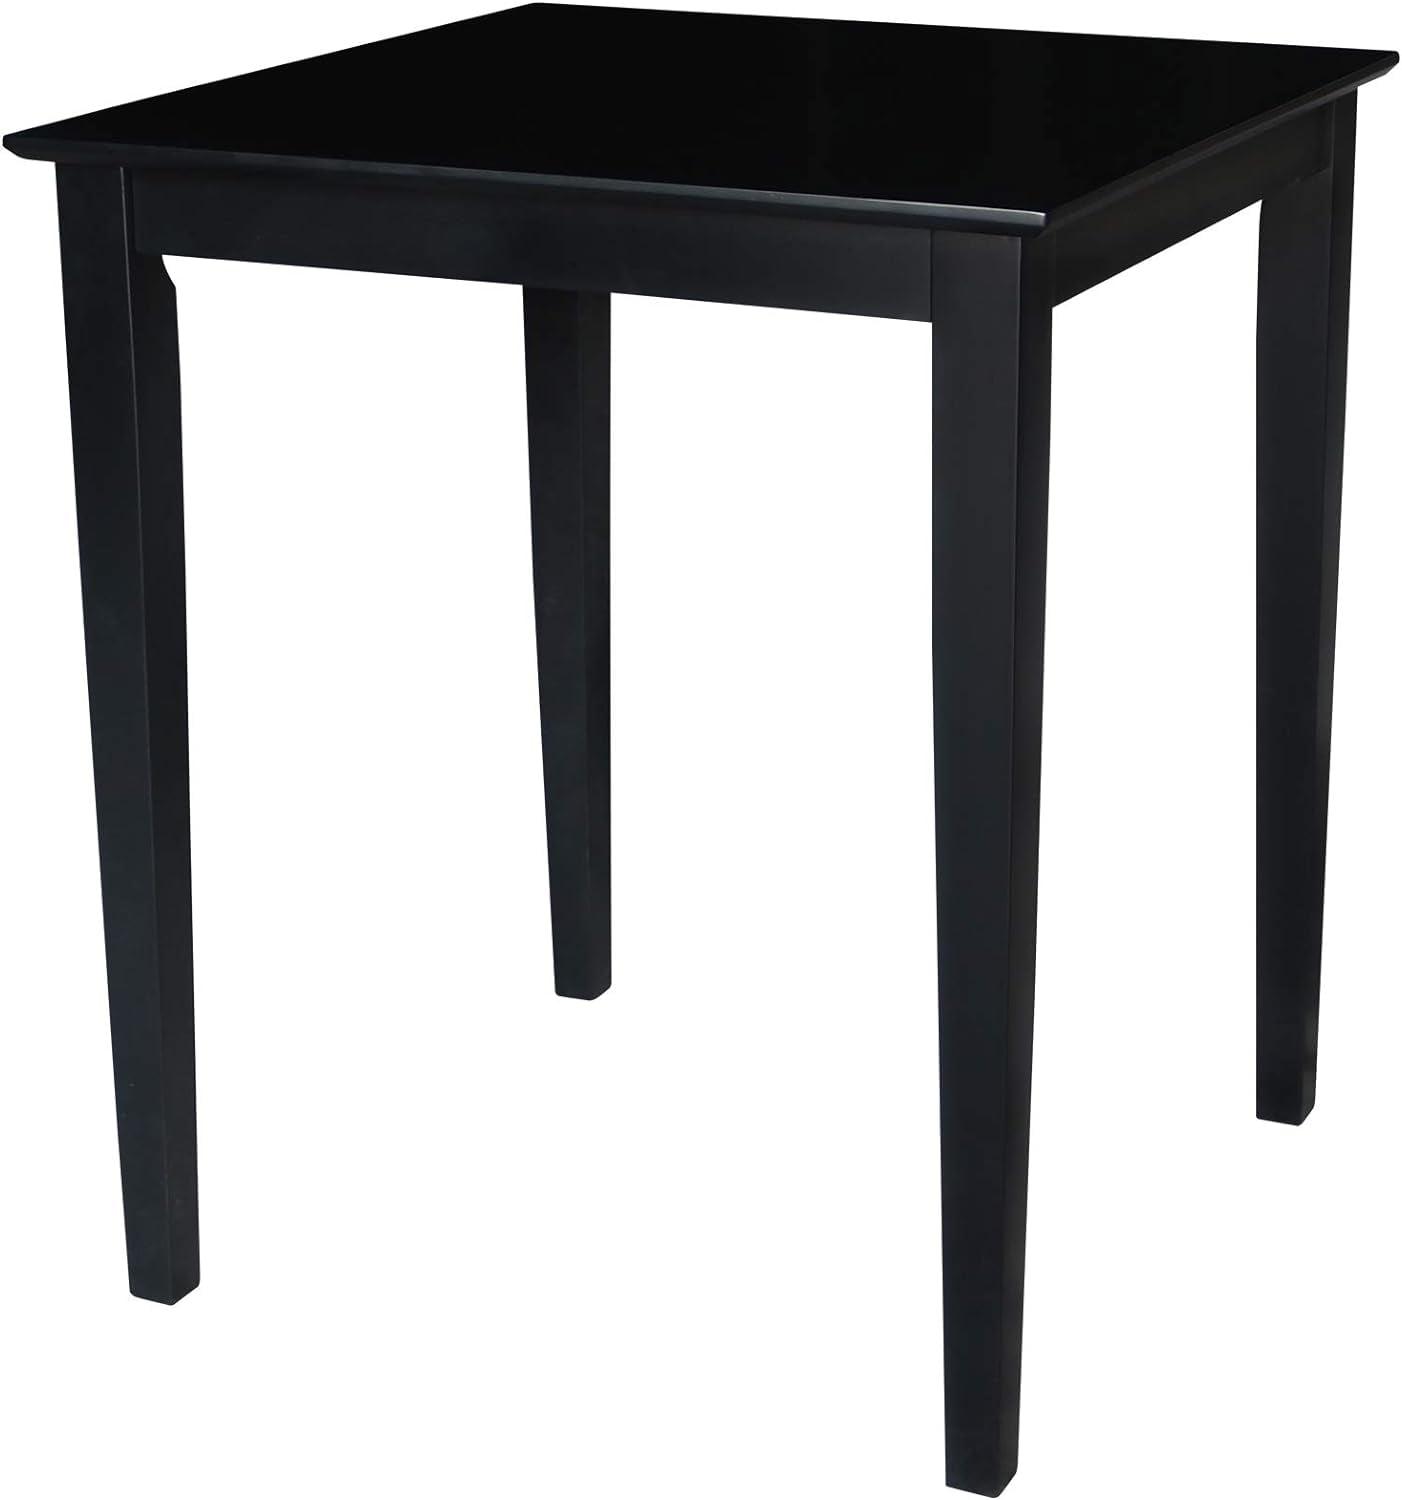 Elegant Shaker-Style Solid Wood Counter Height Table in Black